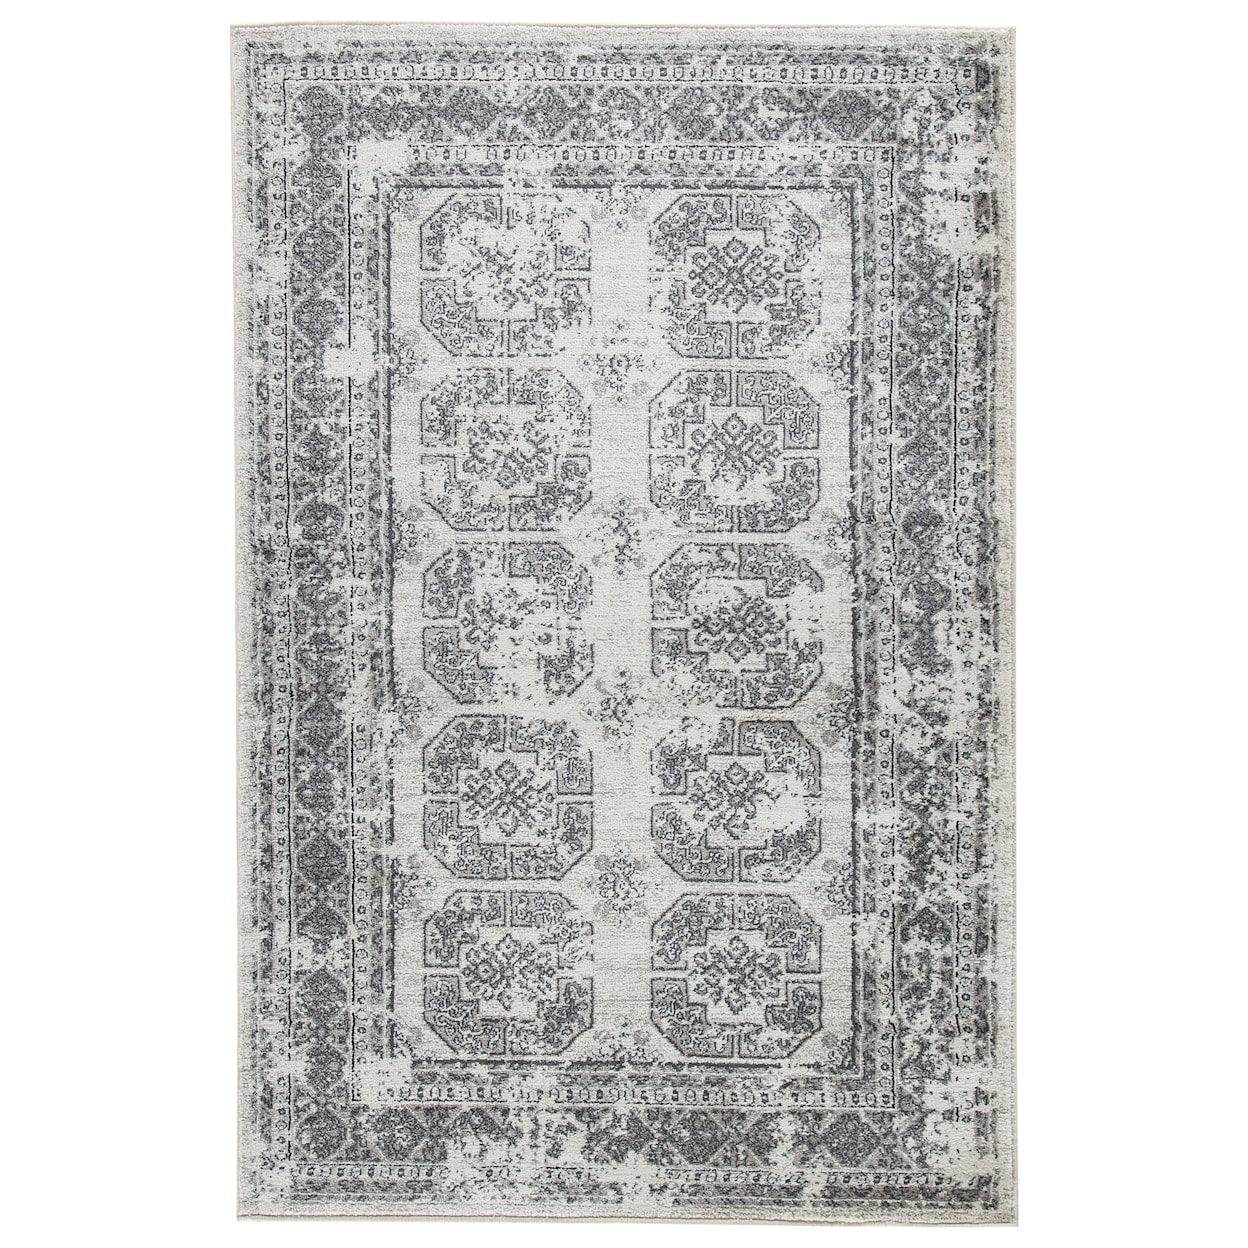 Benchcraft Transitional Area Rugs Jirou Gray/Taupe Large Rug